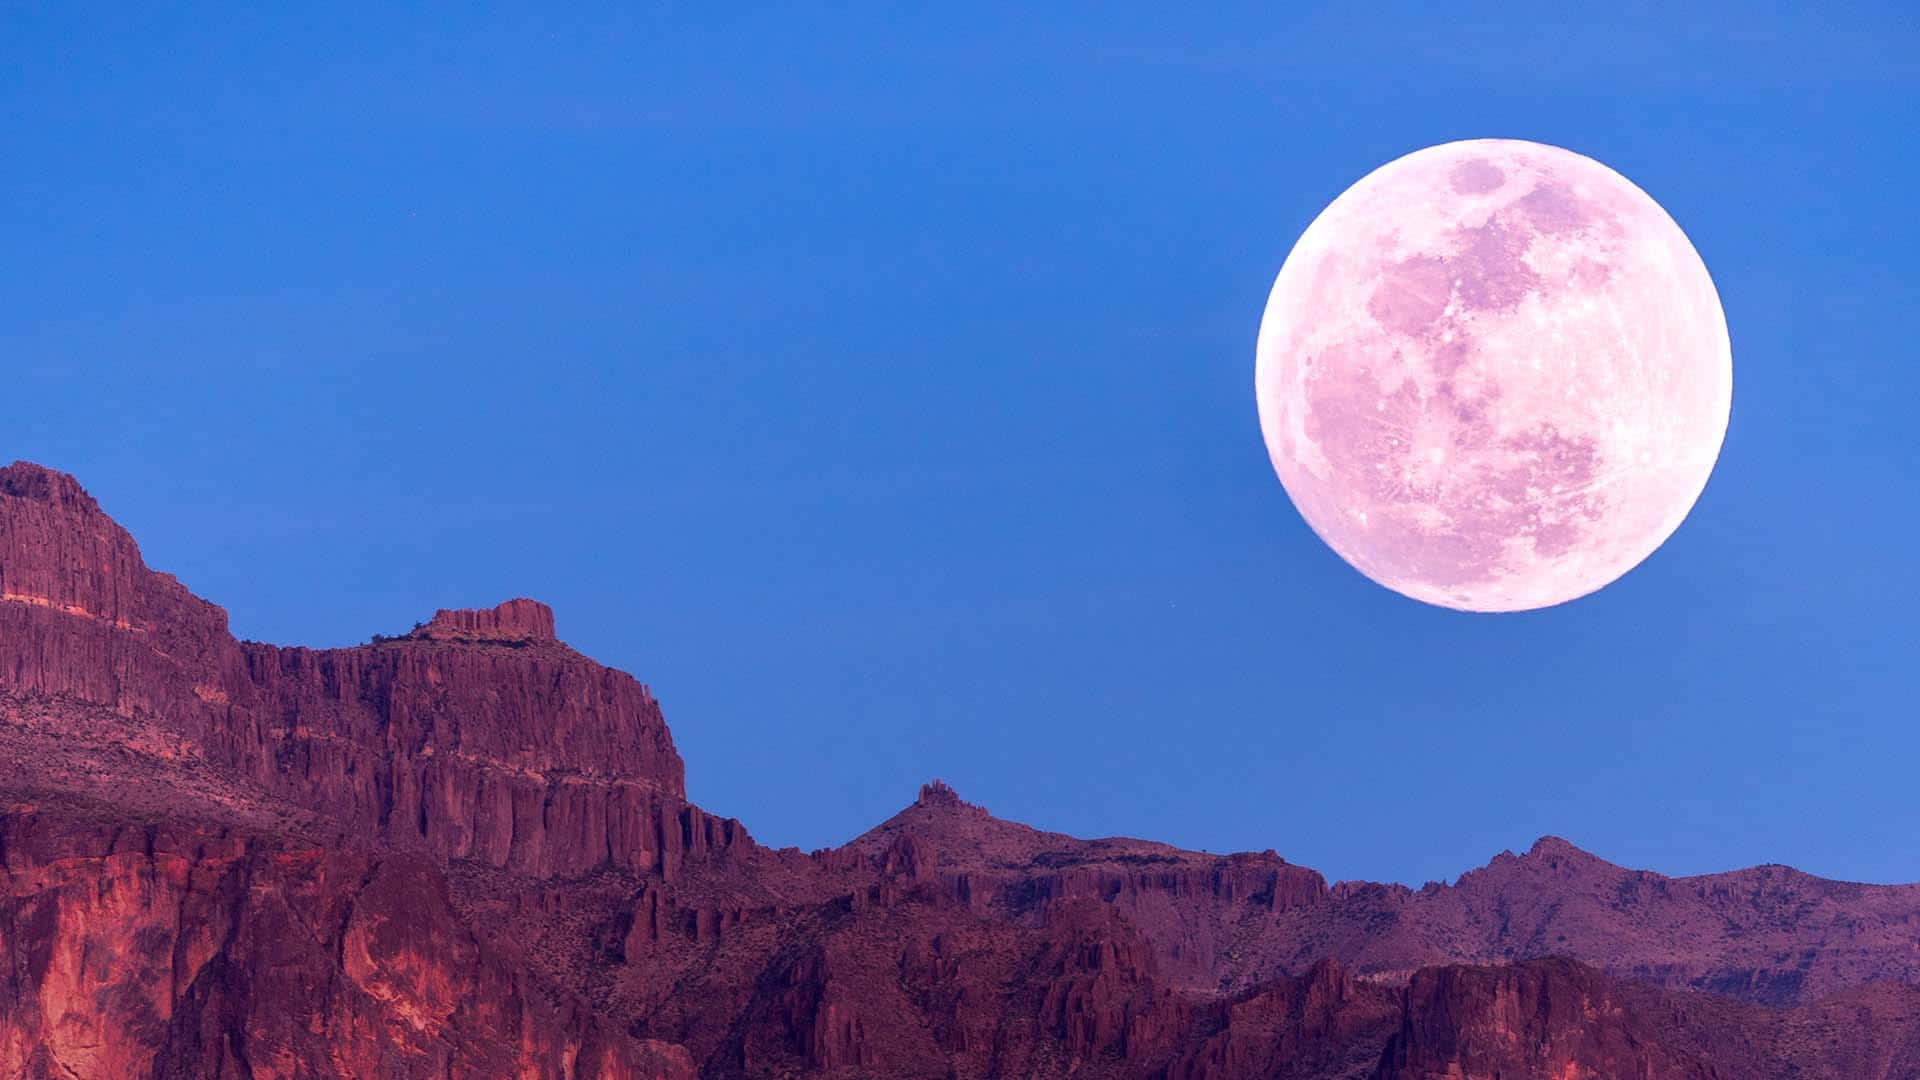 A Pink Moon Rising Over A Mountain Range